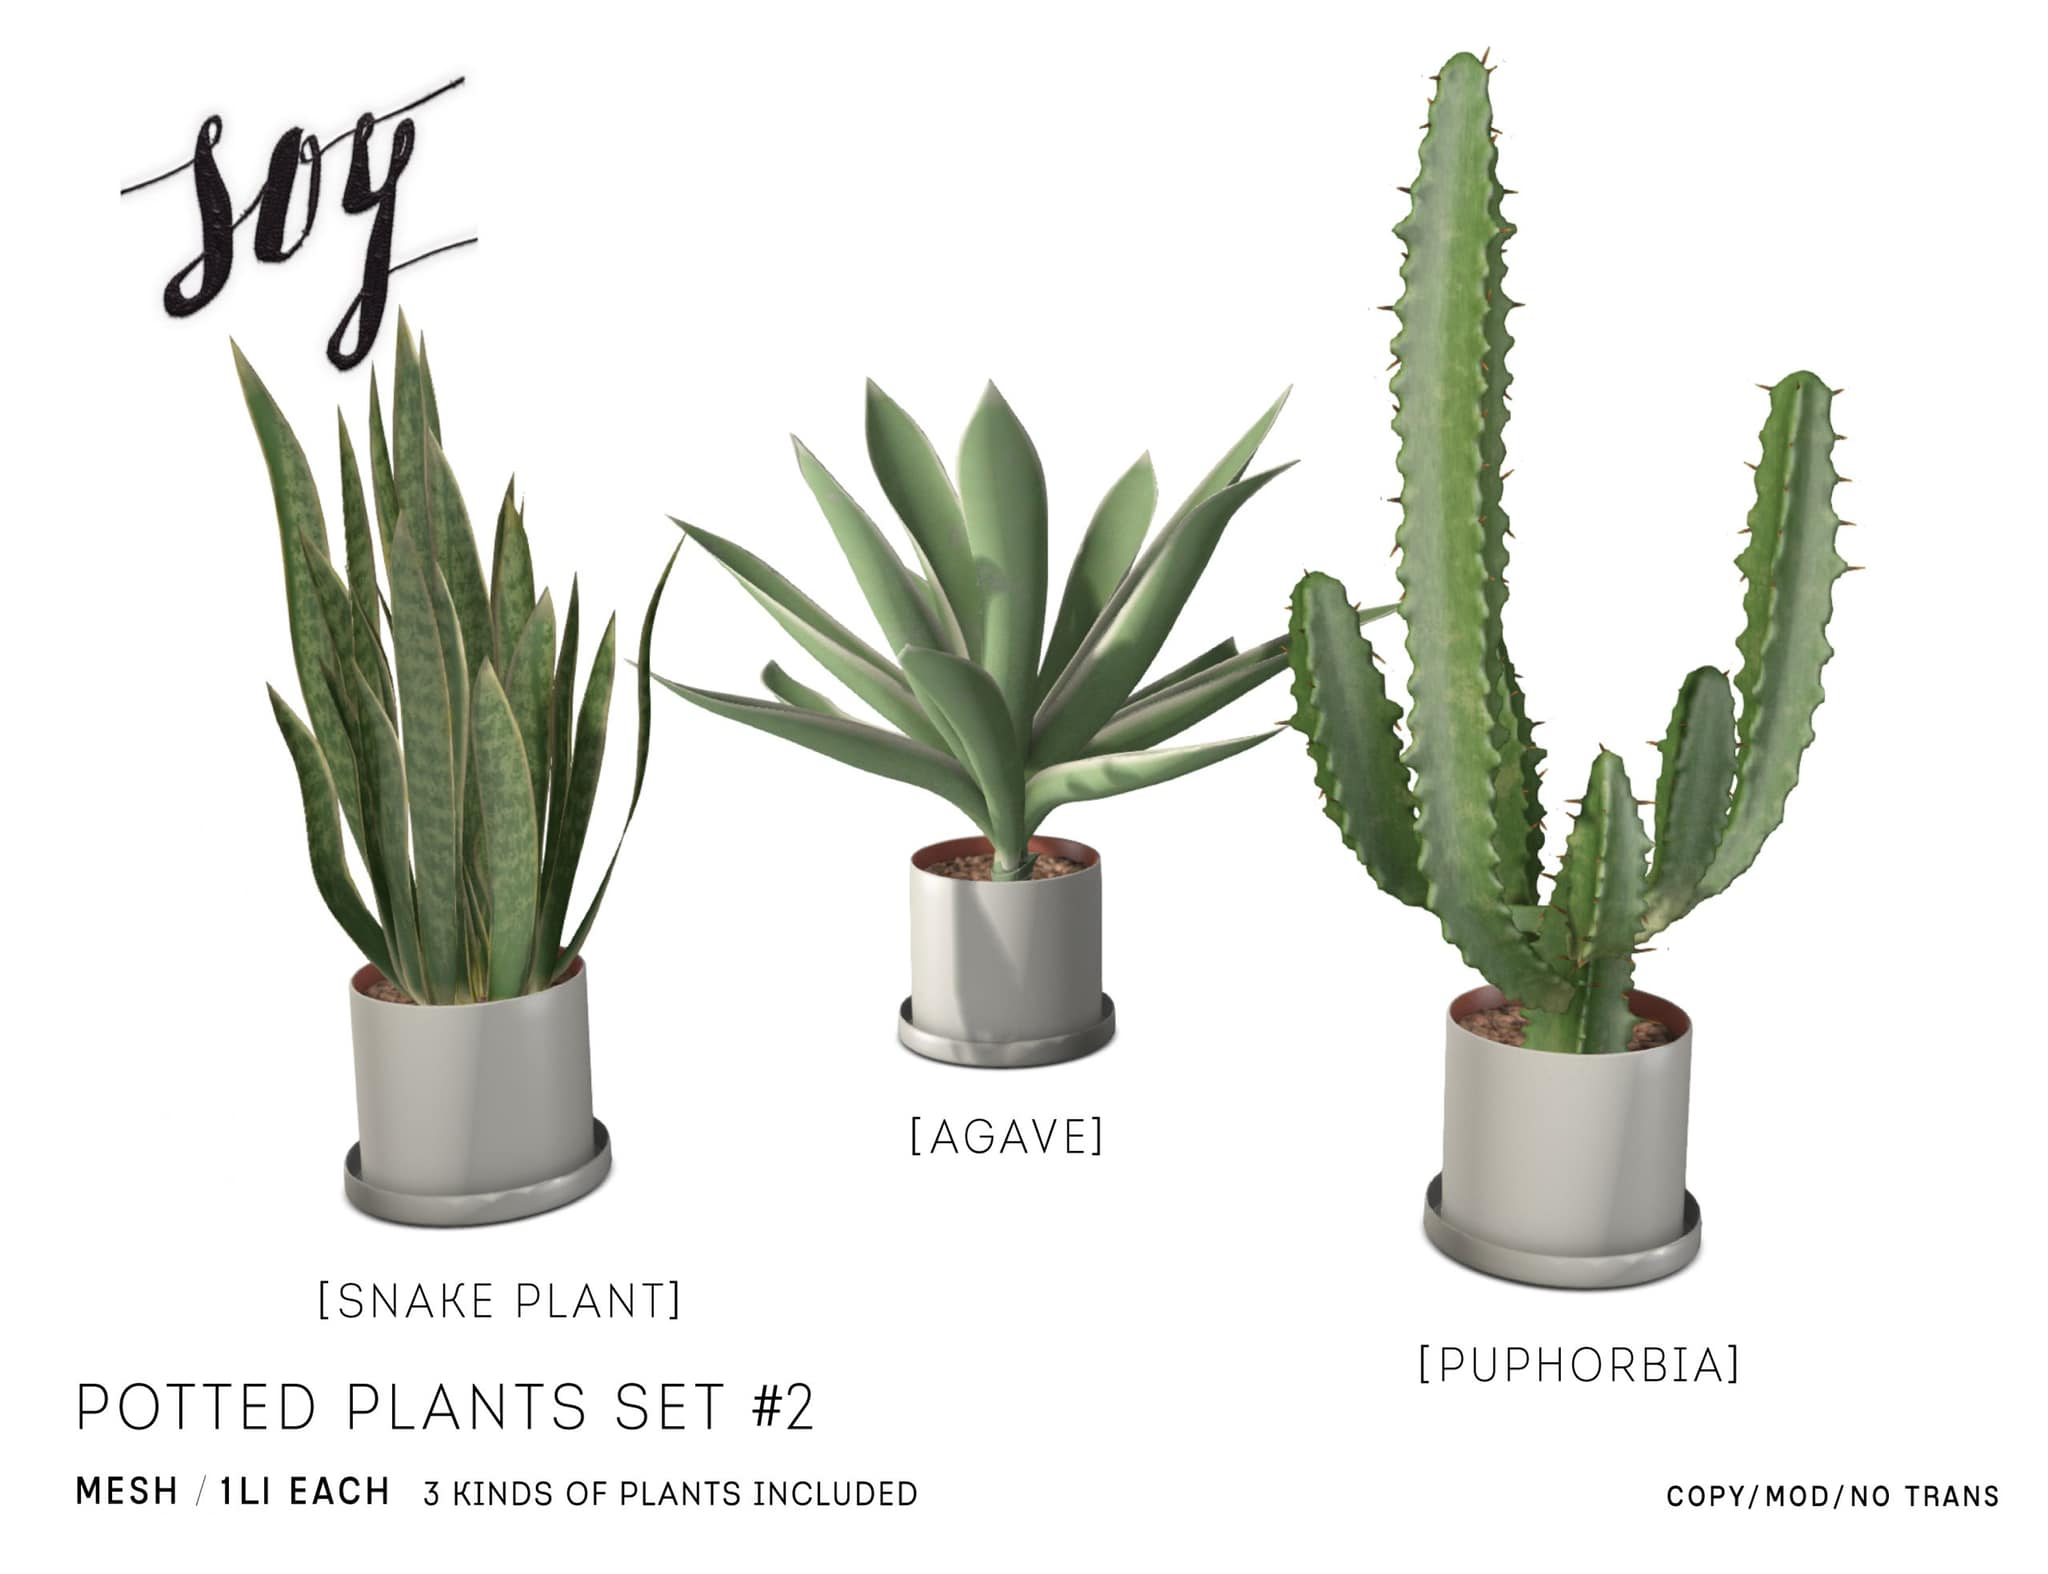 Soy – Potted Plants Set #2/Cane Planter Cover